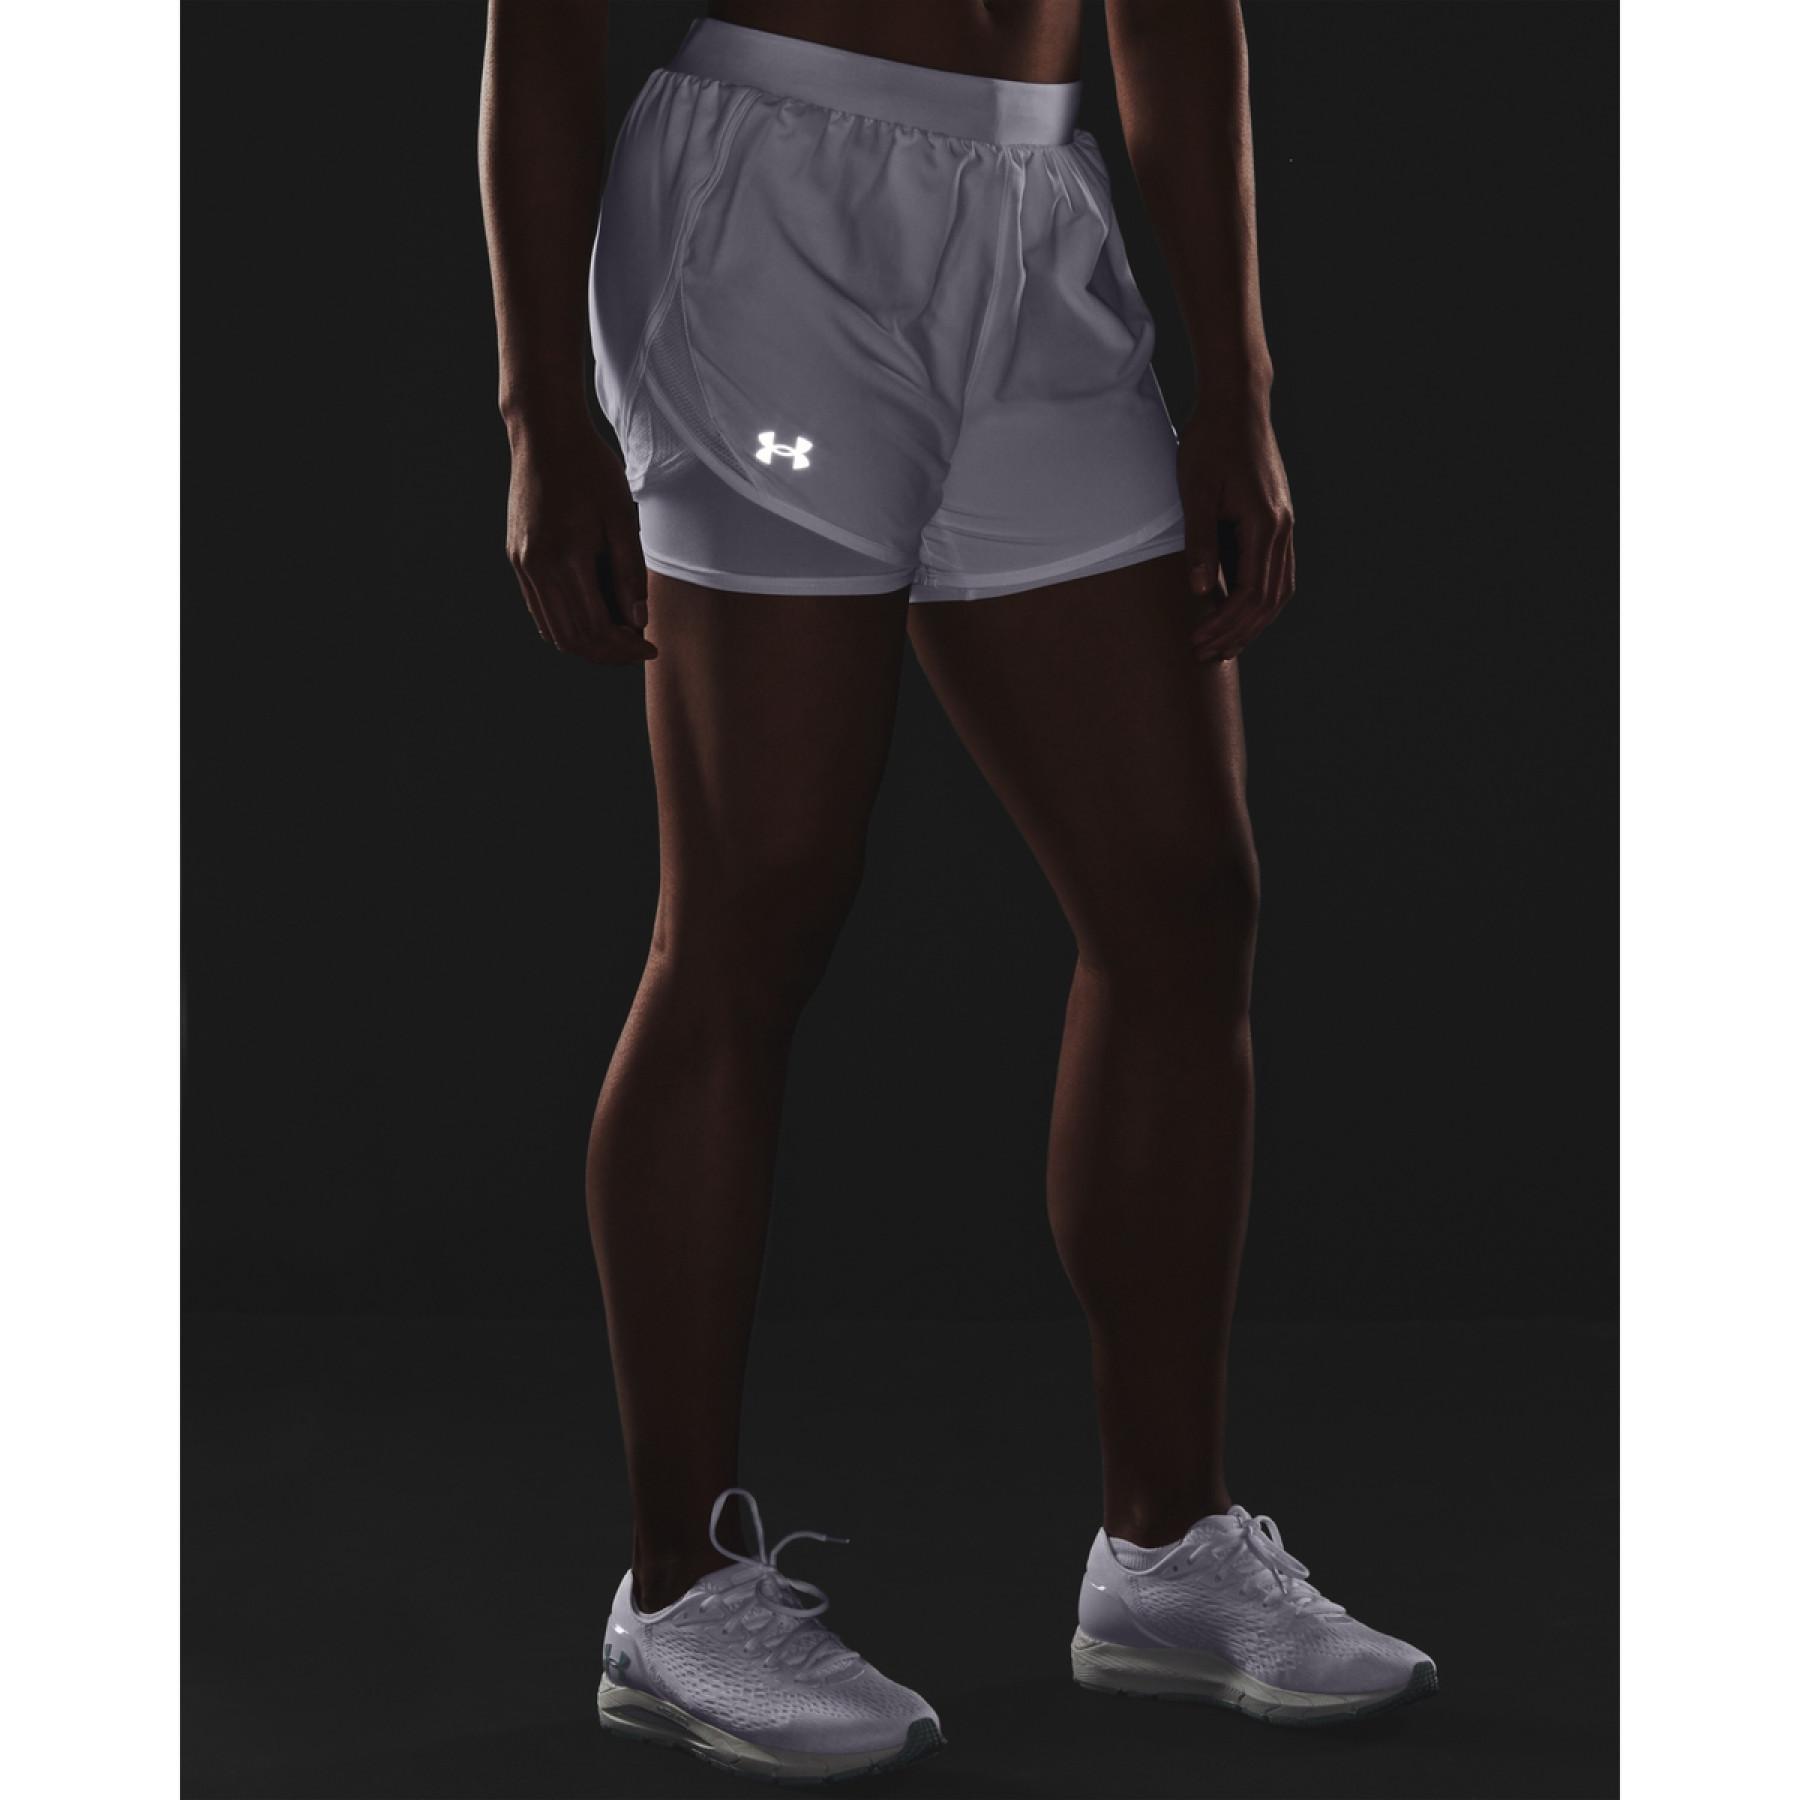 Women's shorts Under Armour Fly By 2.0 2-in-1